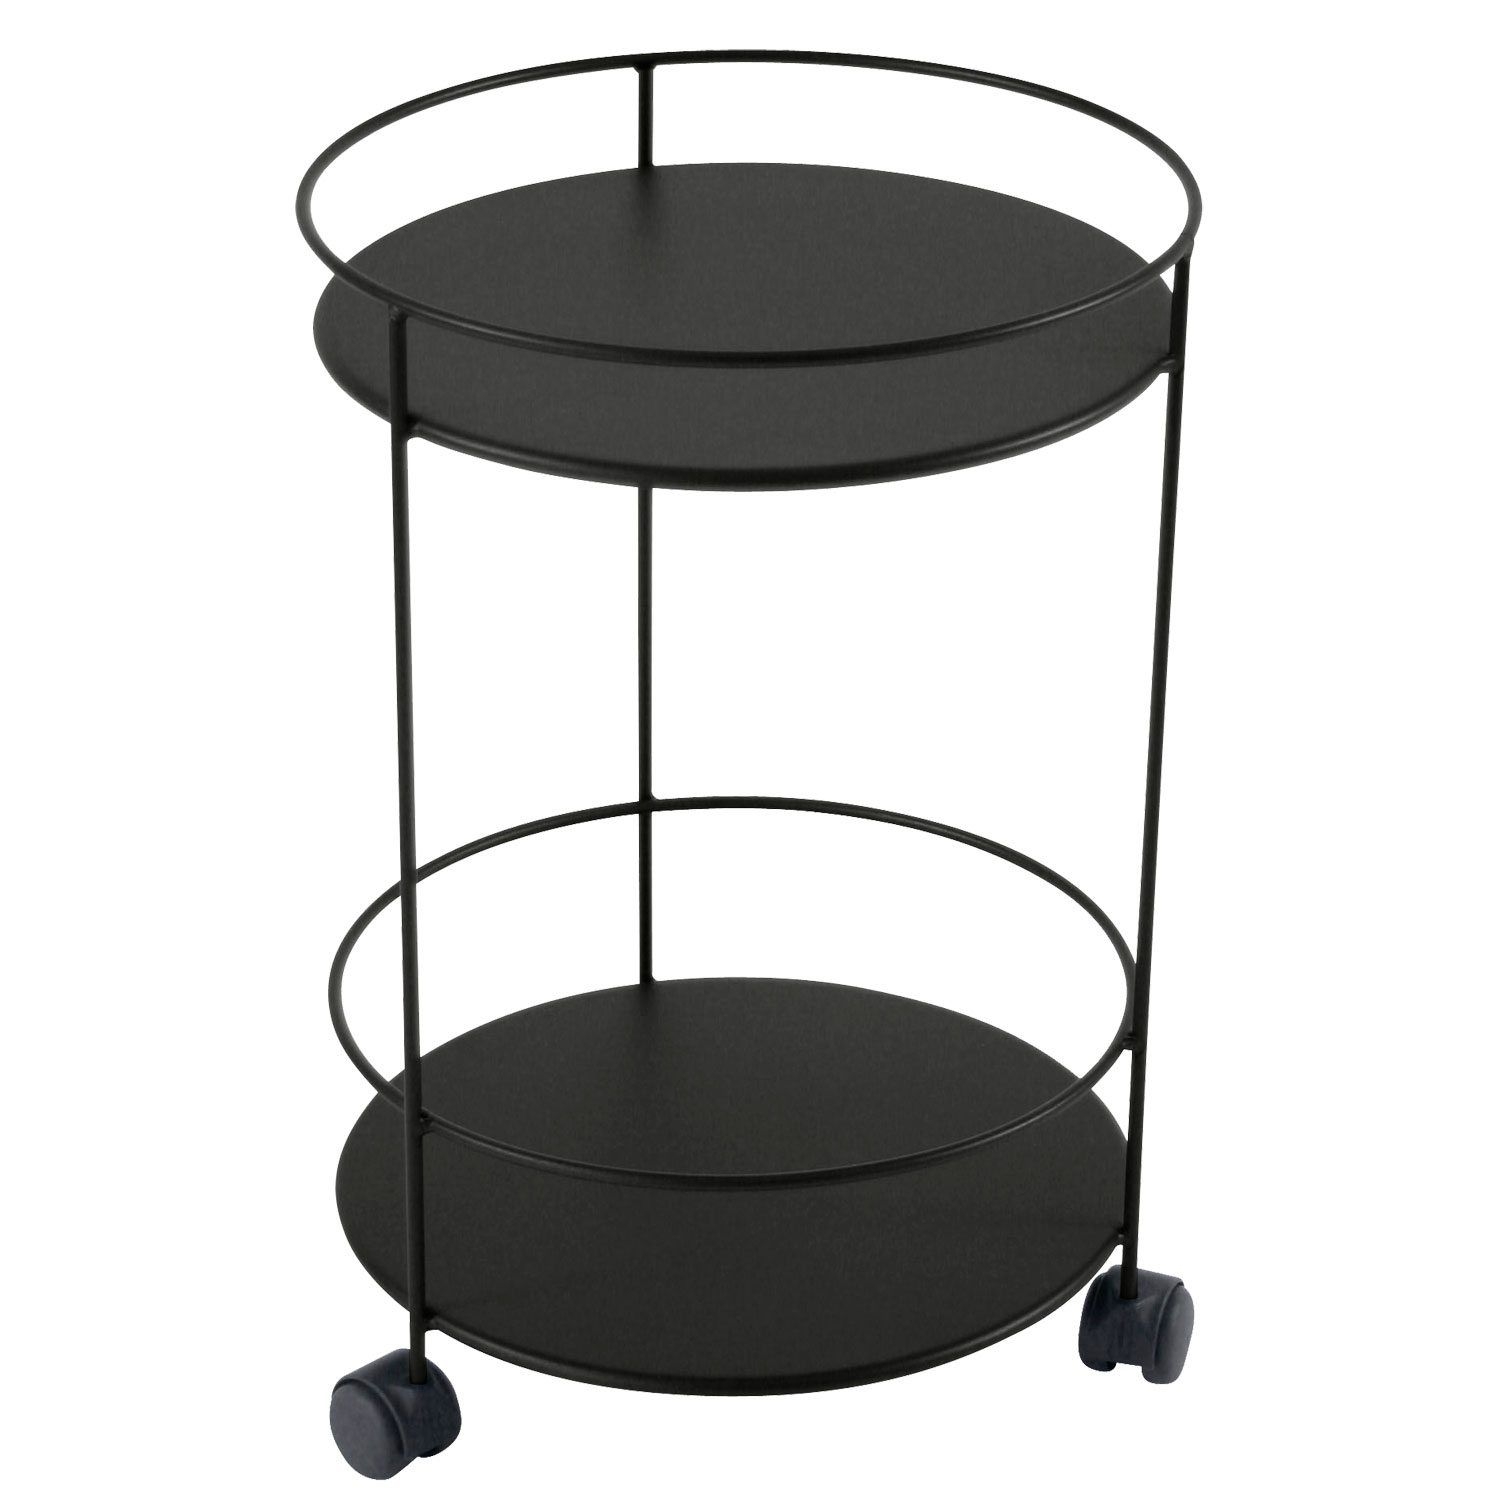 Buy small double top fermob side table with wheels online